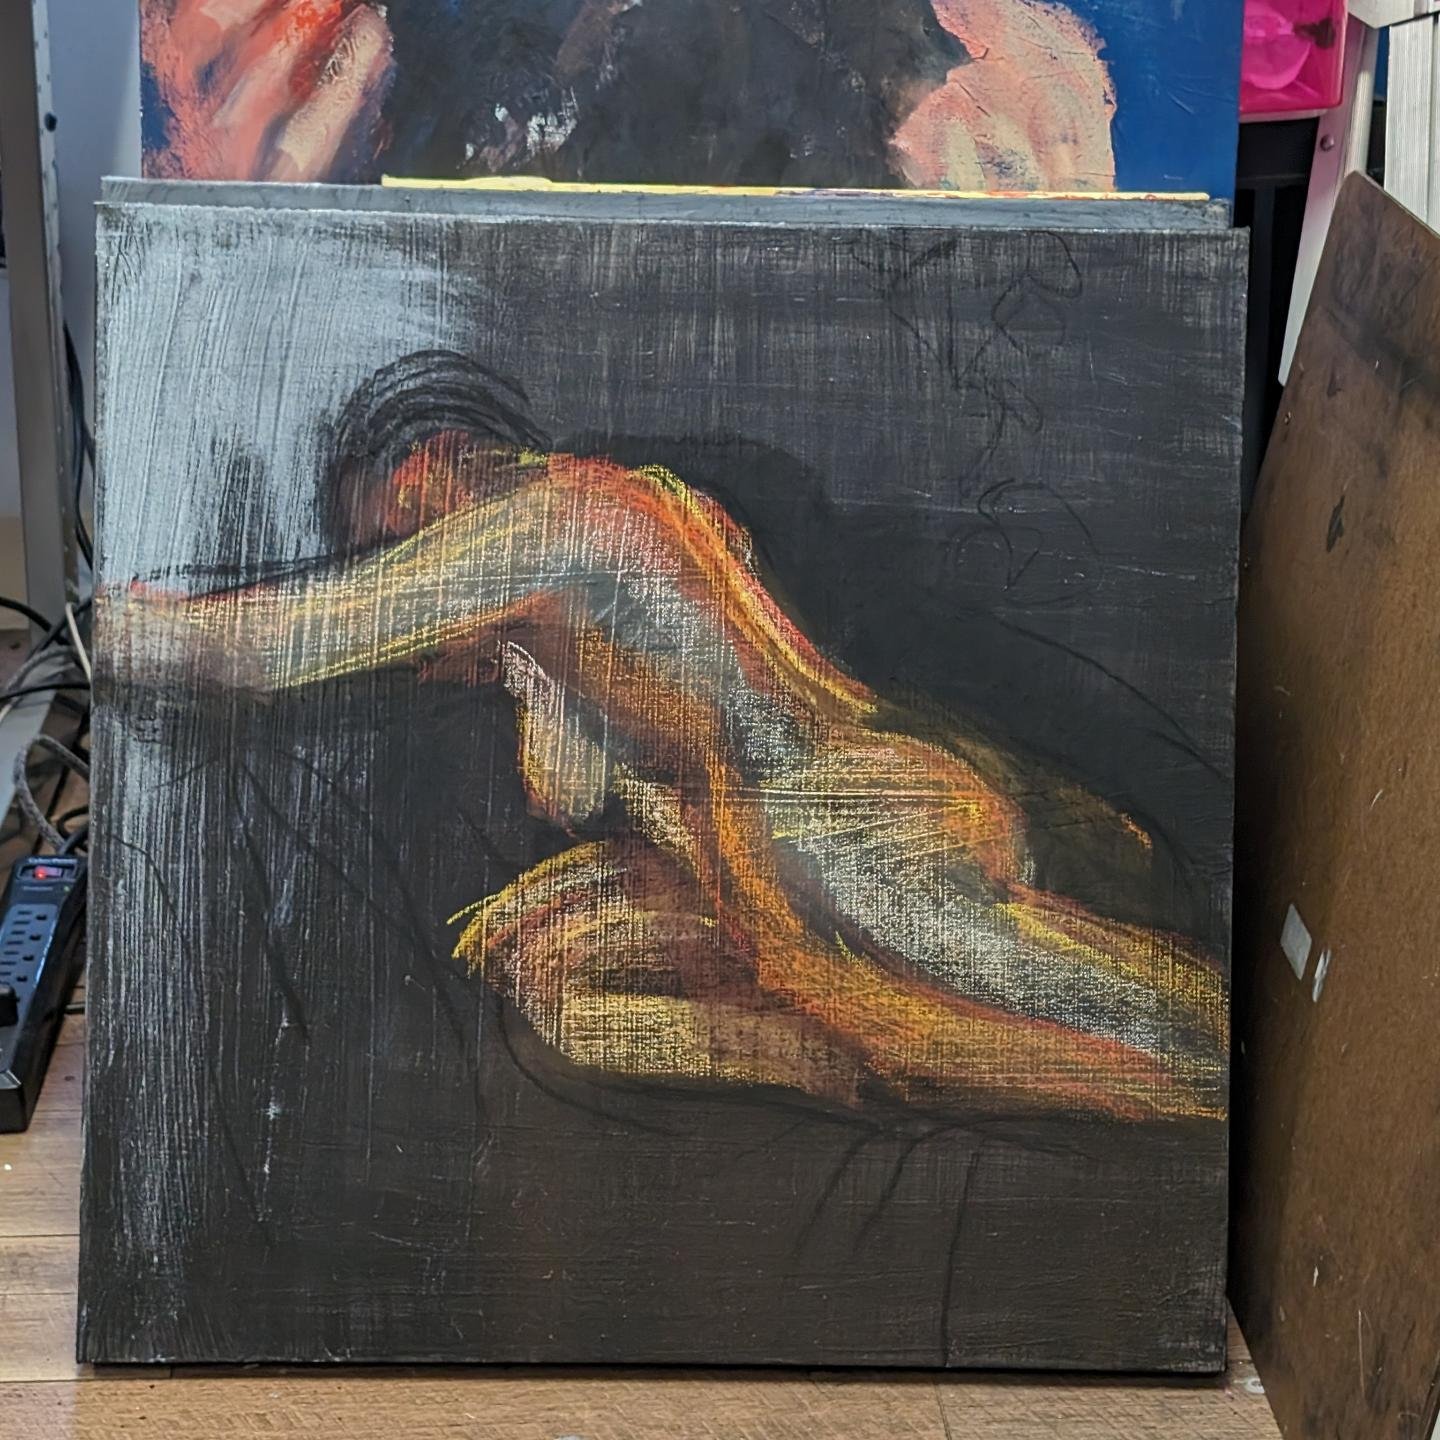 Curious about my process? Grab your questions and join me Saturday, May 18th starting at 4pm for an opening reception of a new show @ashtonartgallery !

Here's a WIP to wet your appetite; I'll be bringing it with me to work on during the reception! I